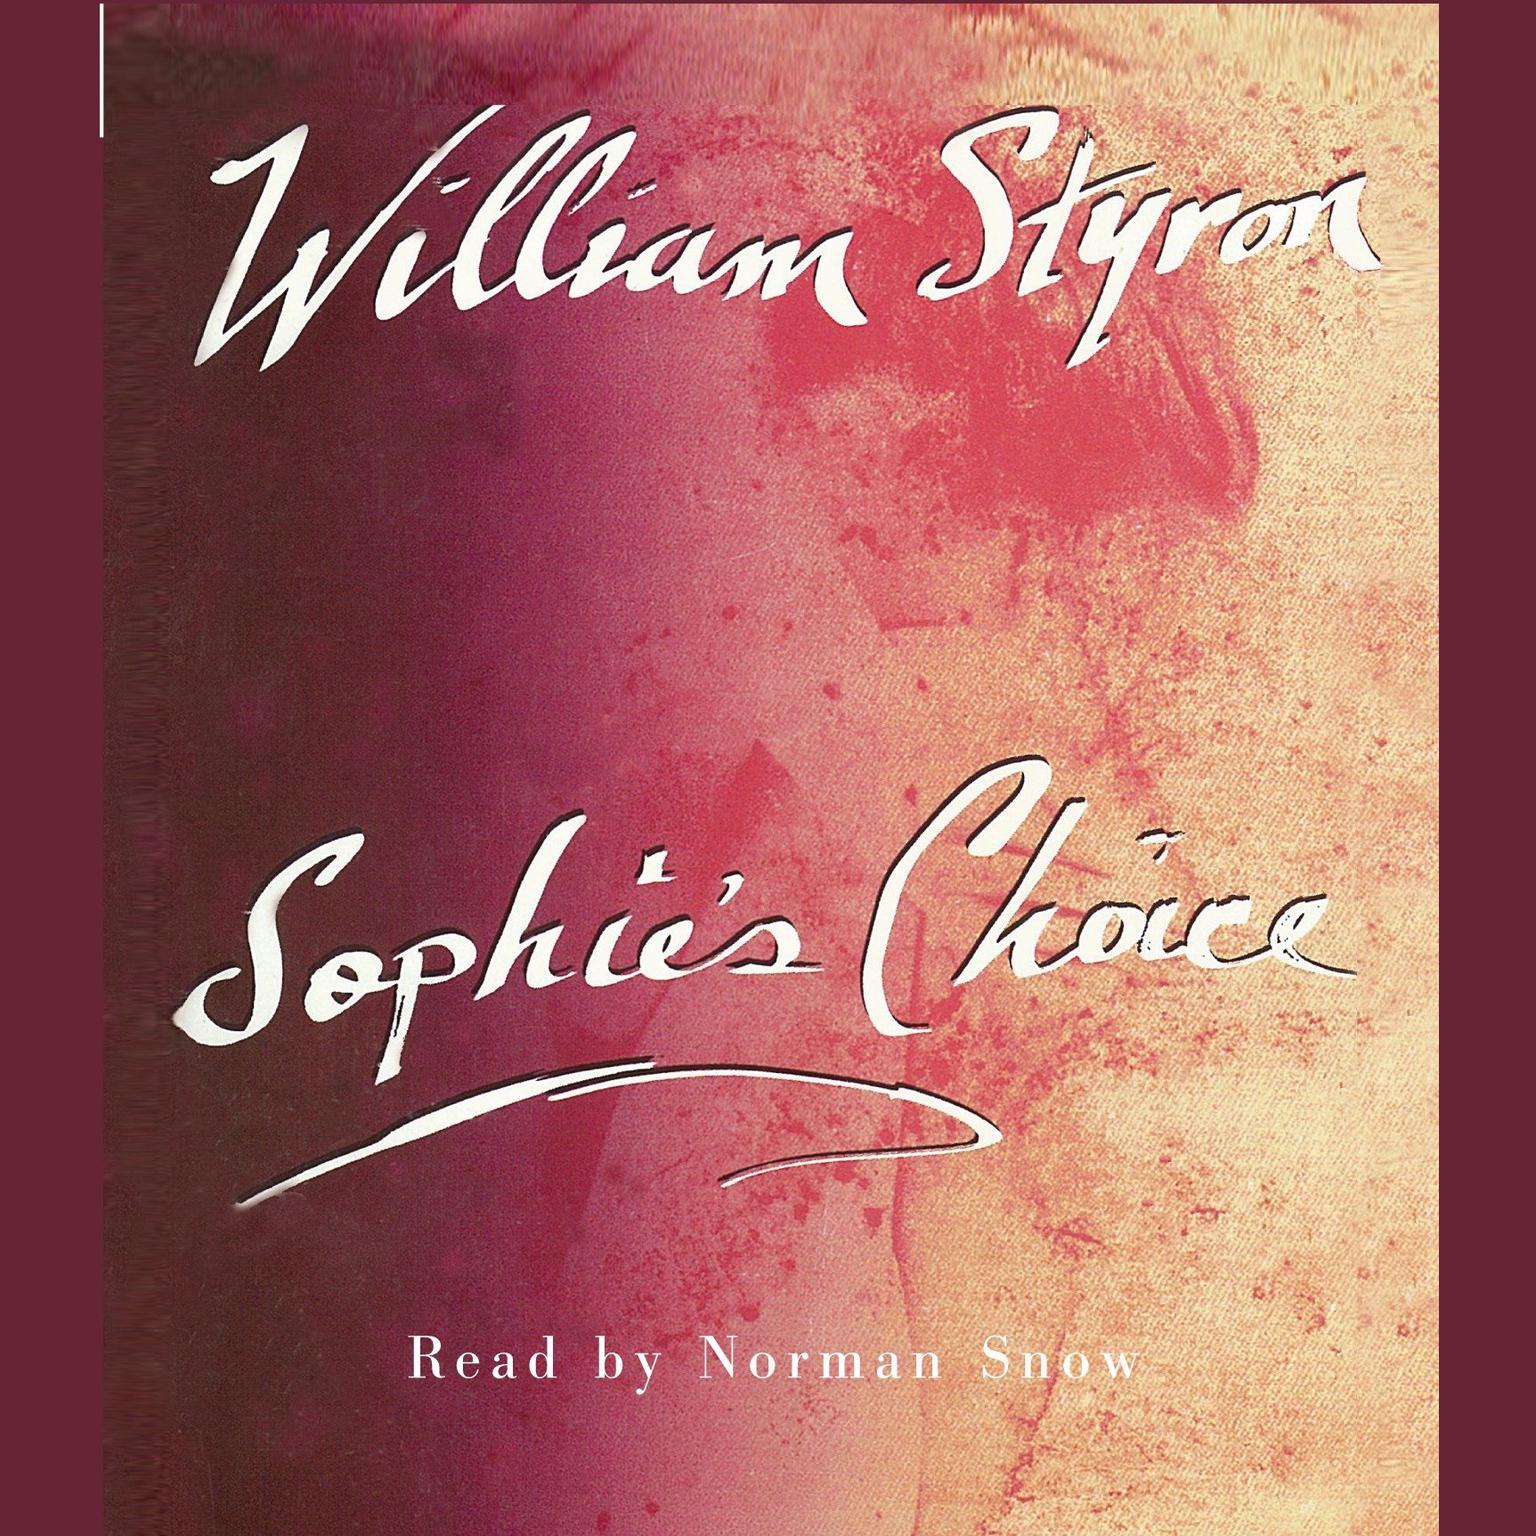 Sophies Choice (Abridged) Audiobook, by William Styron